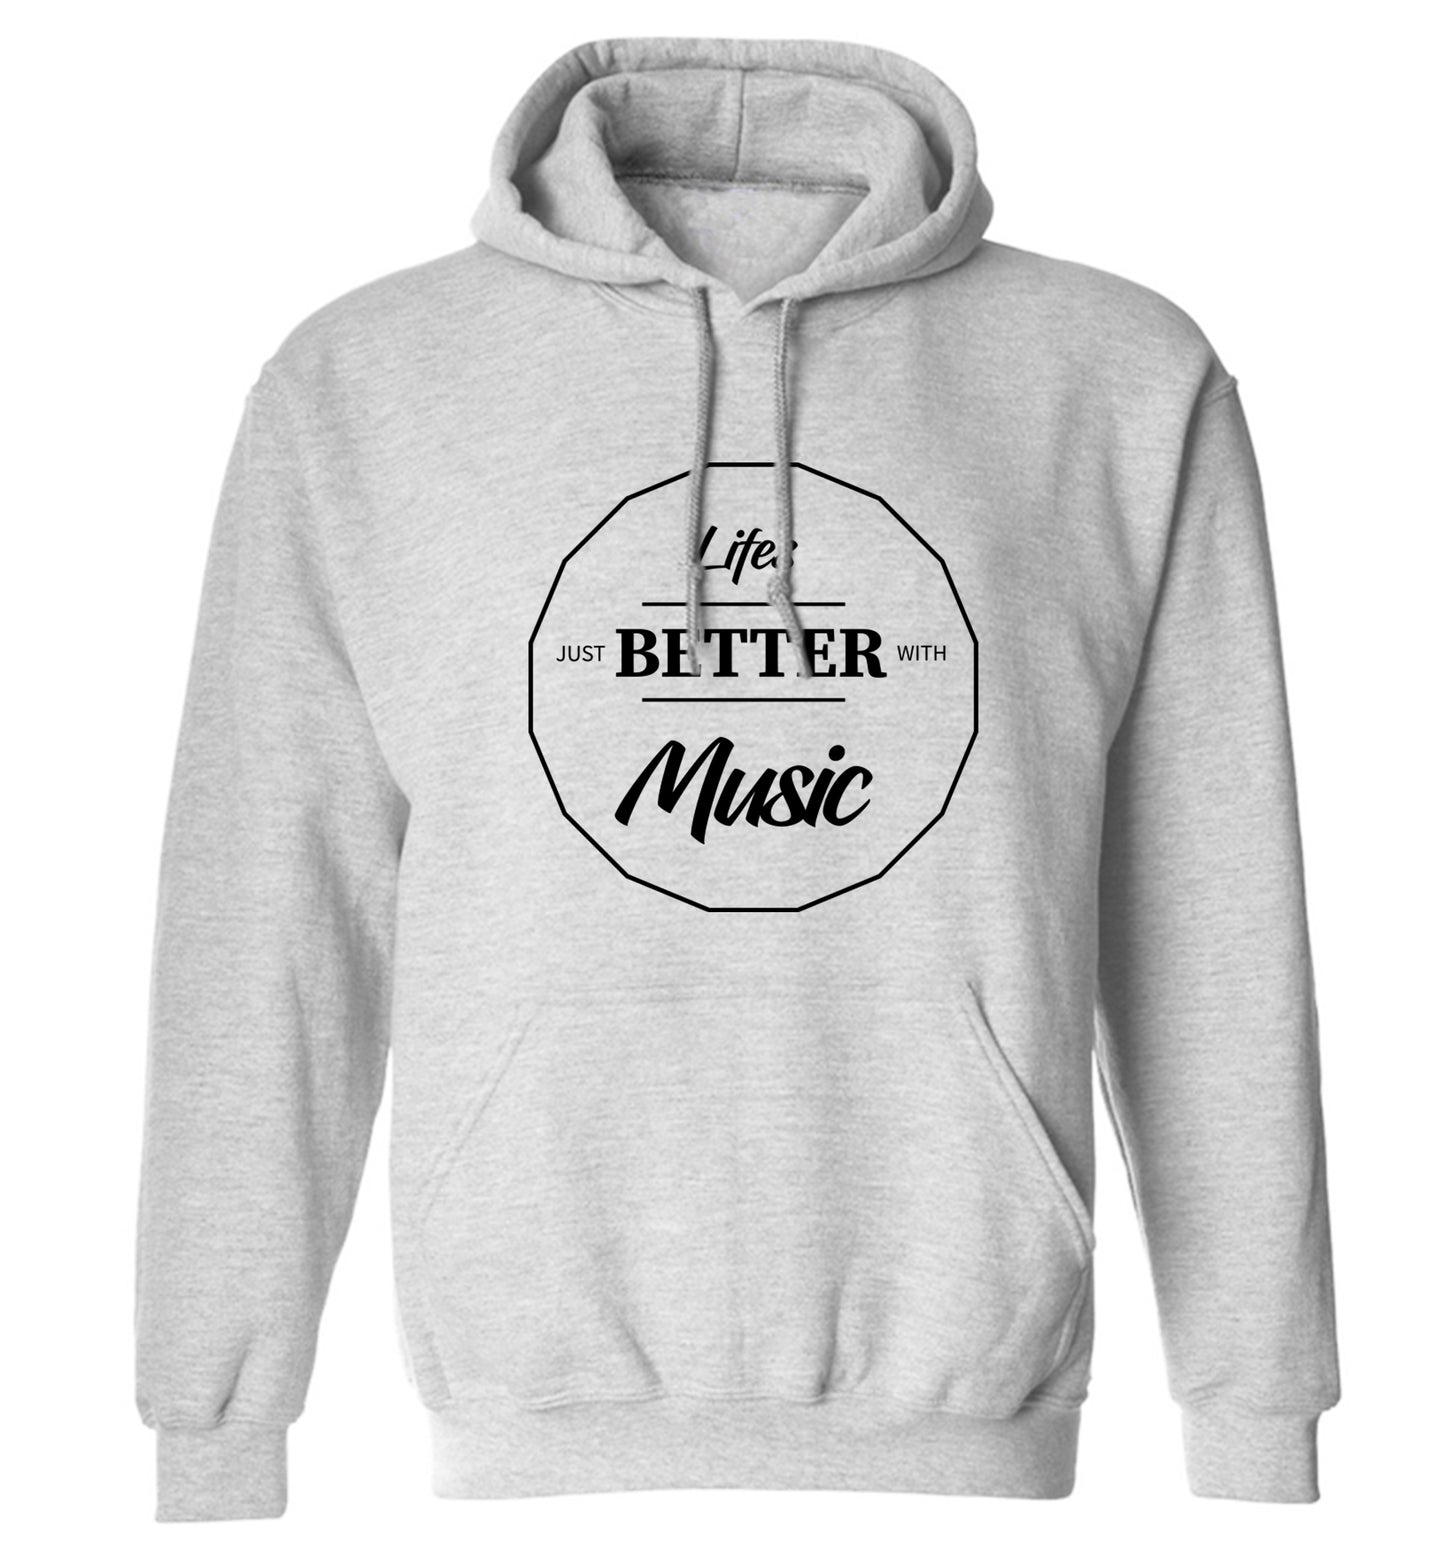 Life is Better With Music adults unisex grey hoodie 2XL